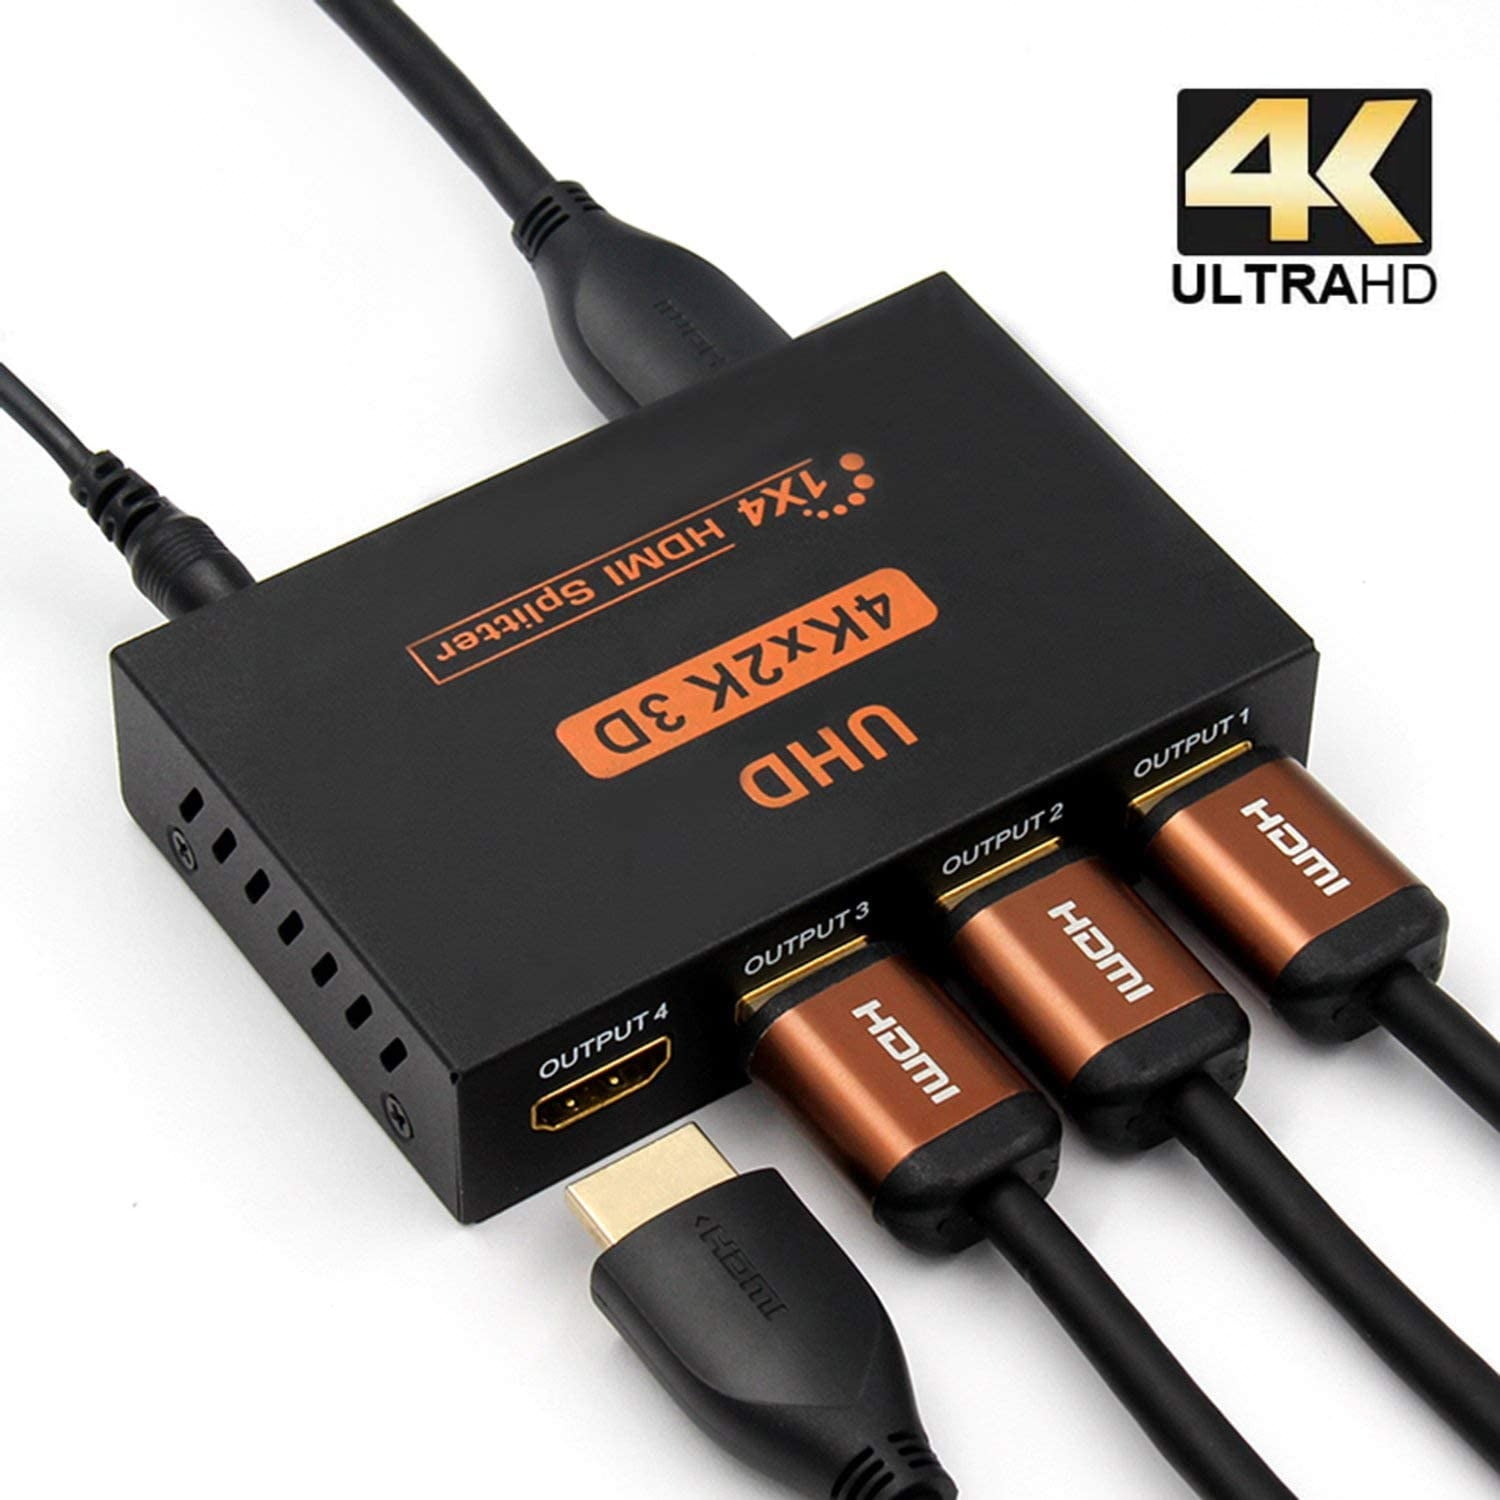 HDMI Splitter 1 in 4 Out 1x4 Ports v1.4 Powered 4K/2K Full Ultra HD 1080p and 3D Support by US Adapter 